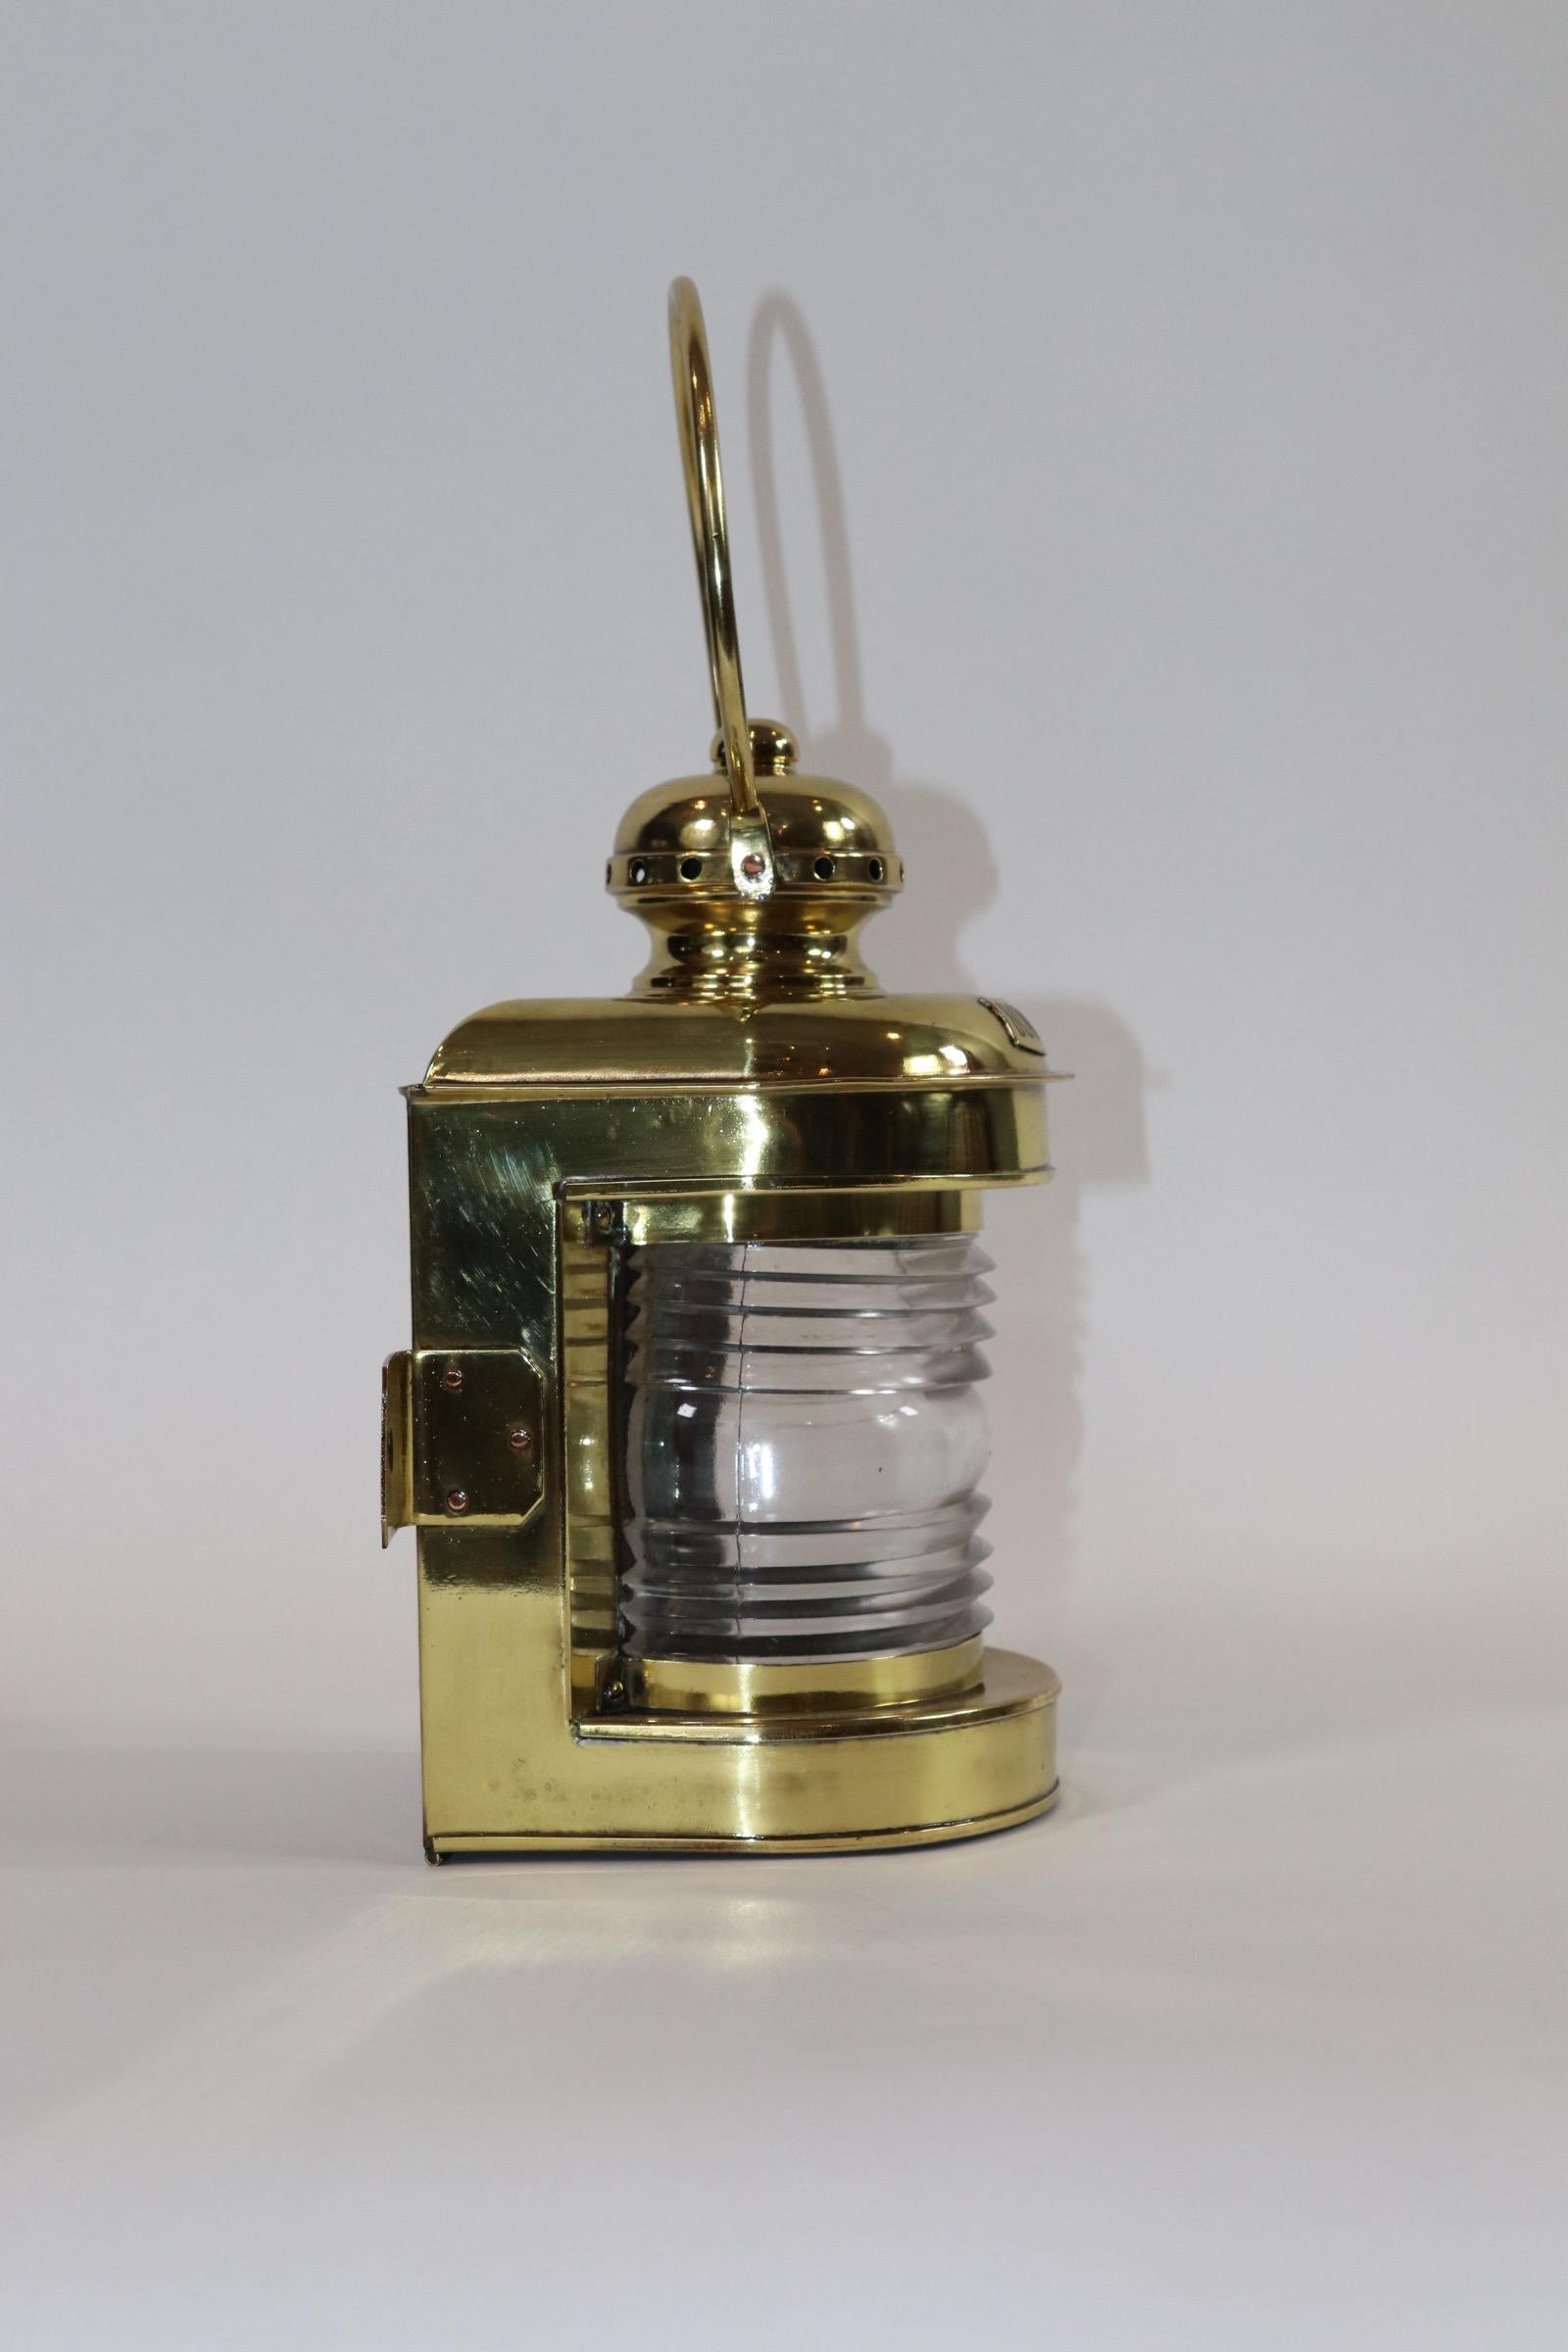 Highly polished and lacquered early 20th century brass boat bow light. With Fresnel lens, loop handle and vented top. No burner or back door. Weight is 3 pounds.